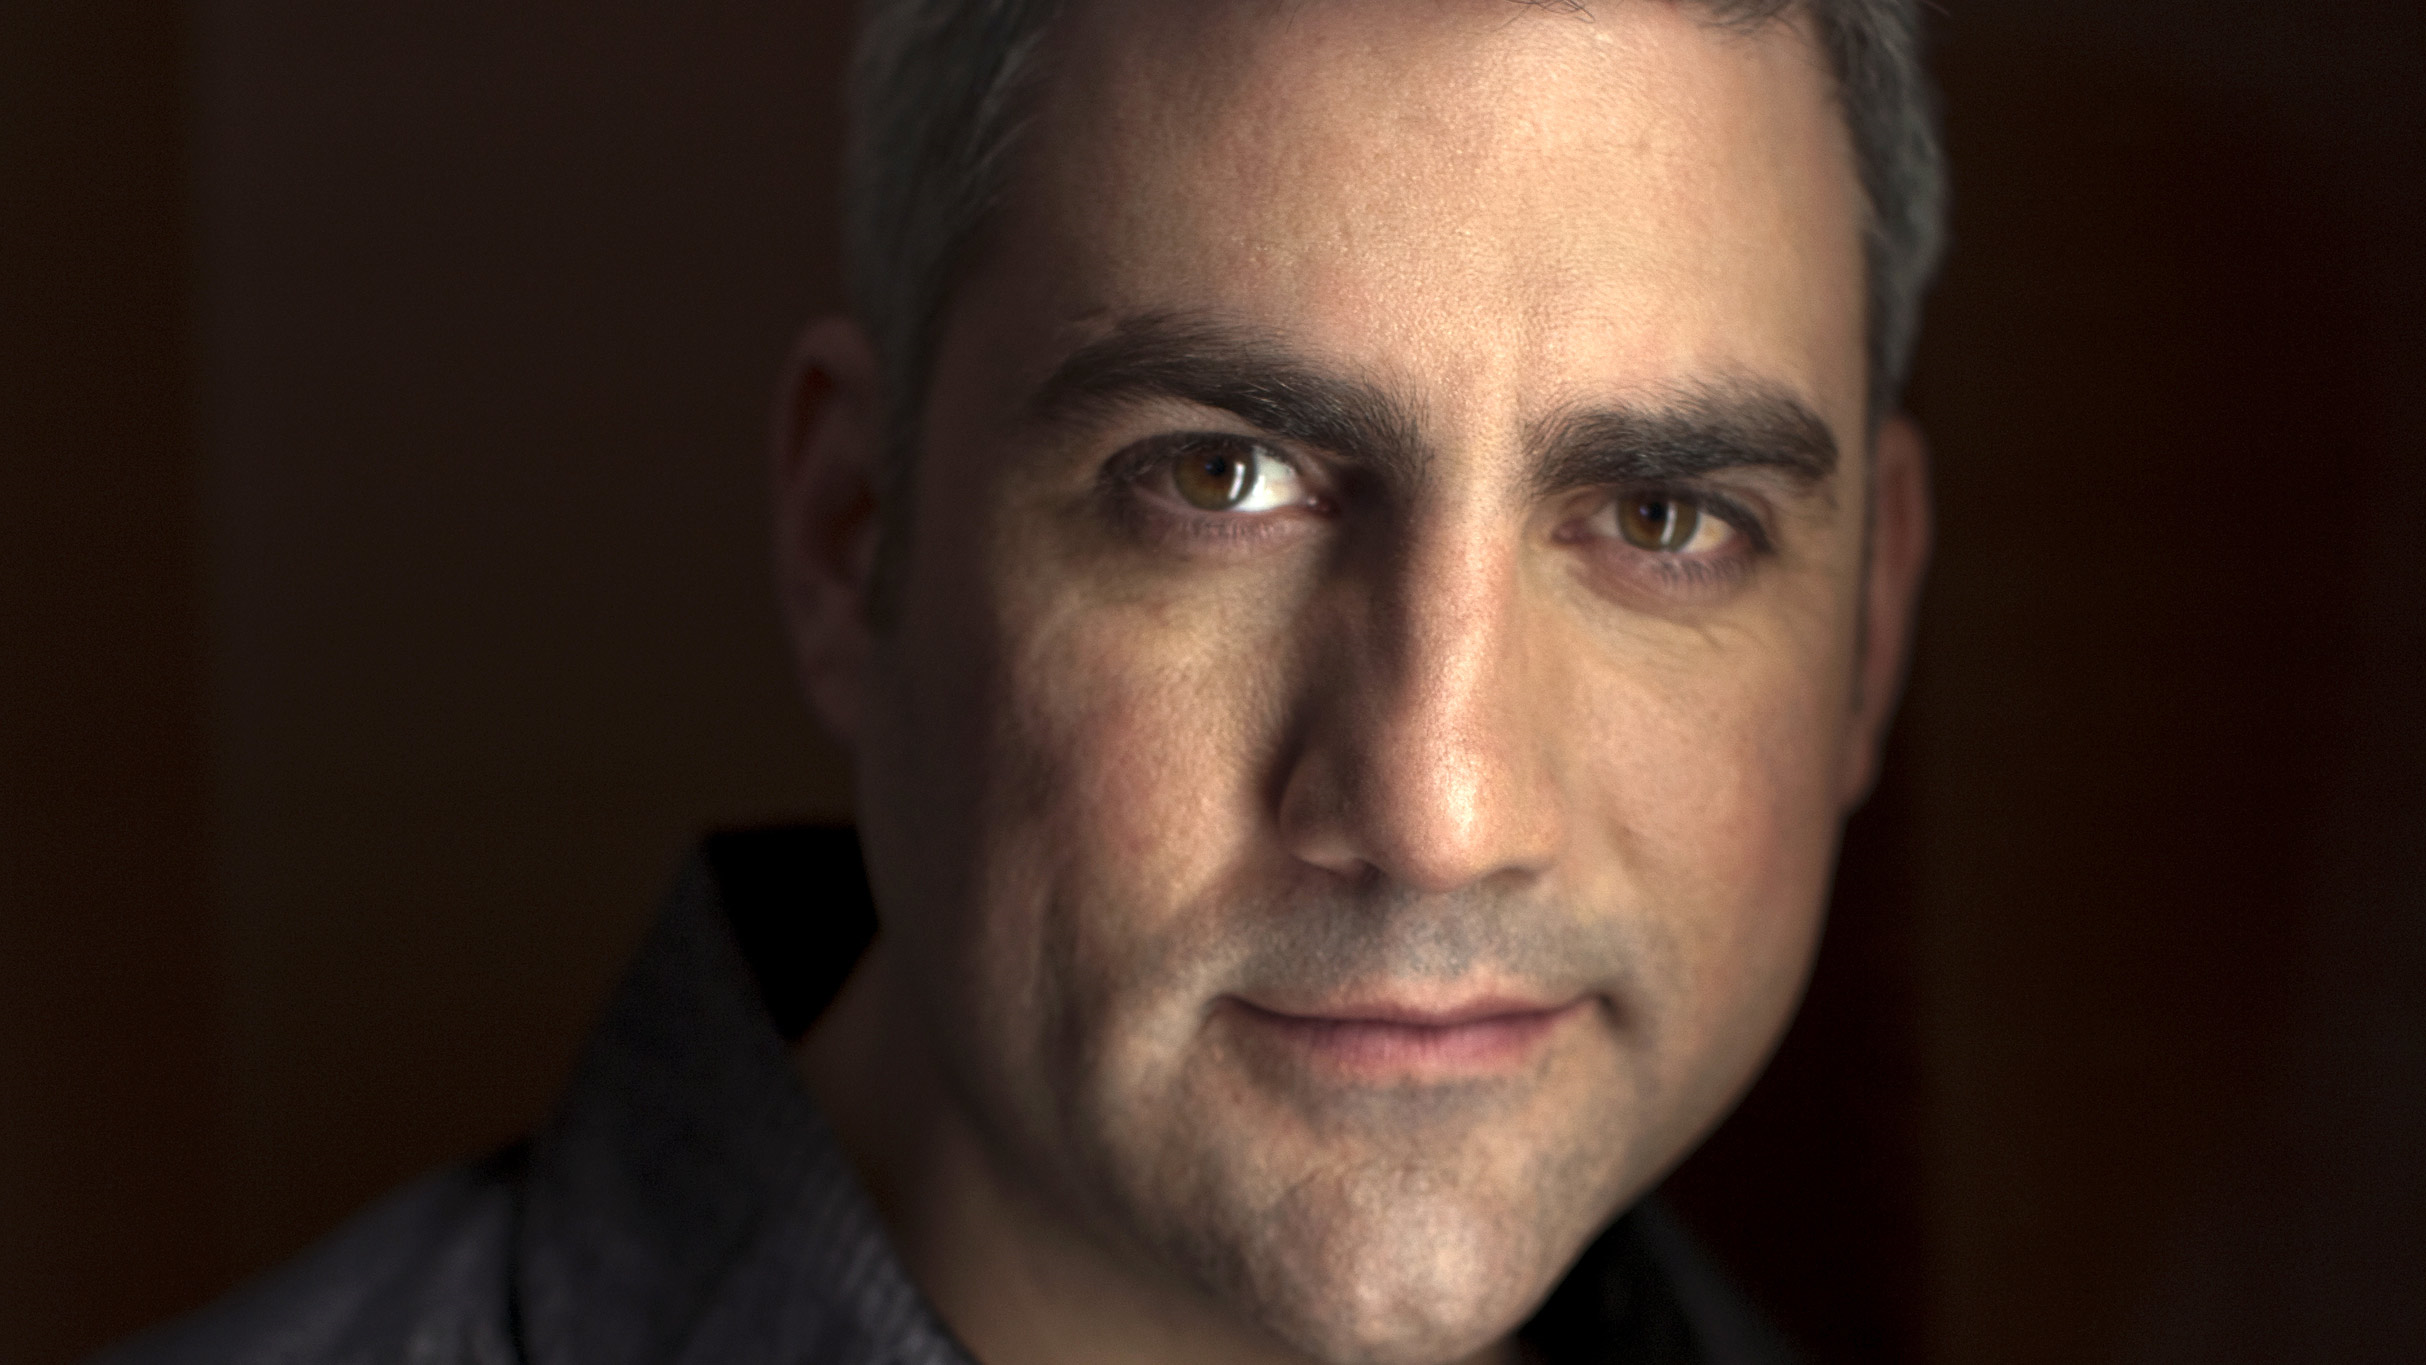 Taylor Hicks at Brown County Music Center